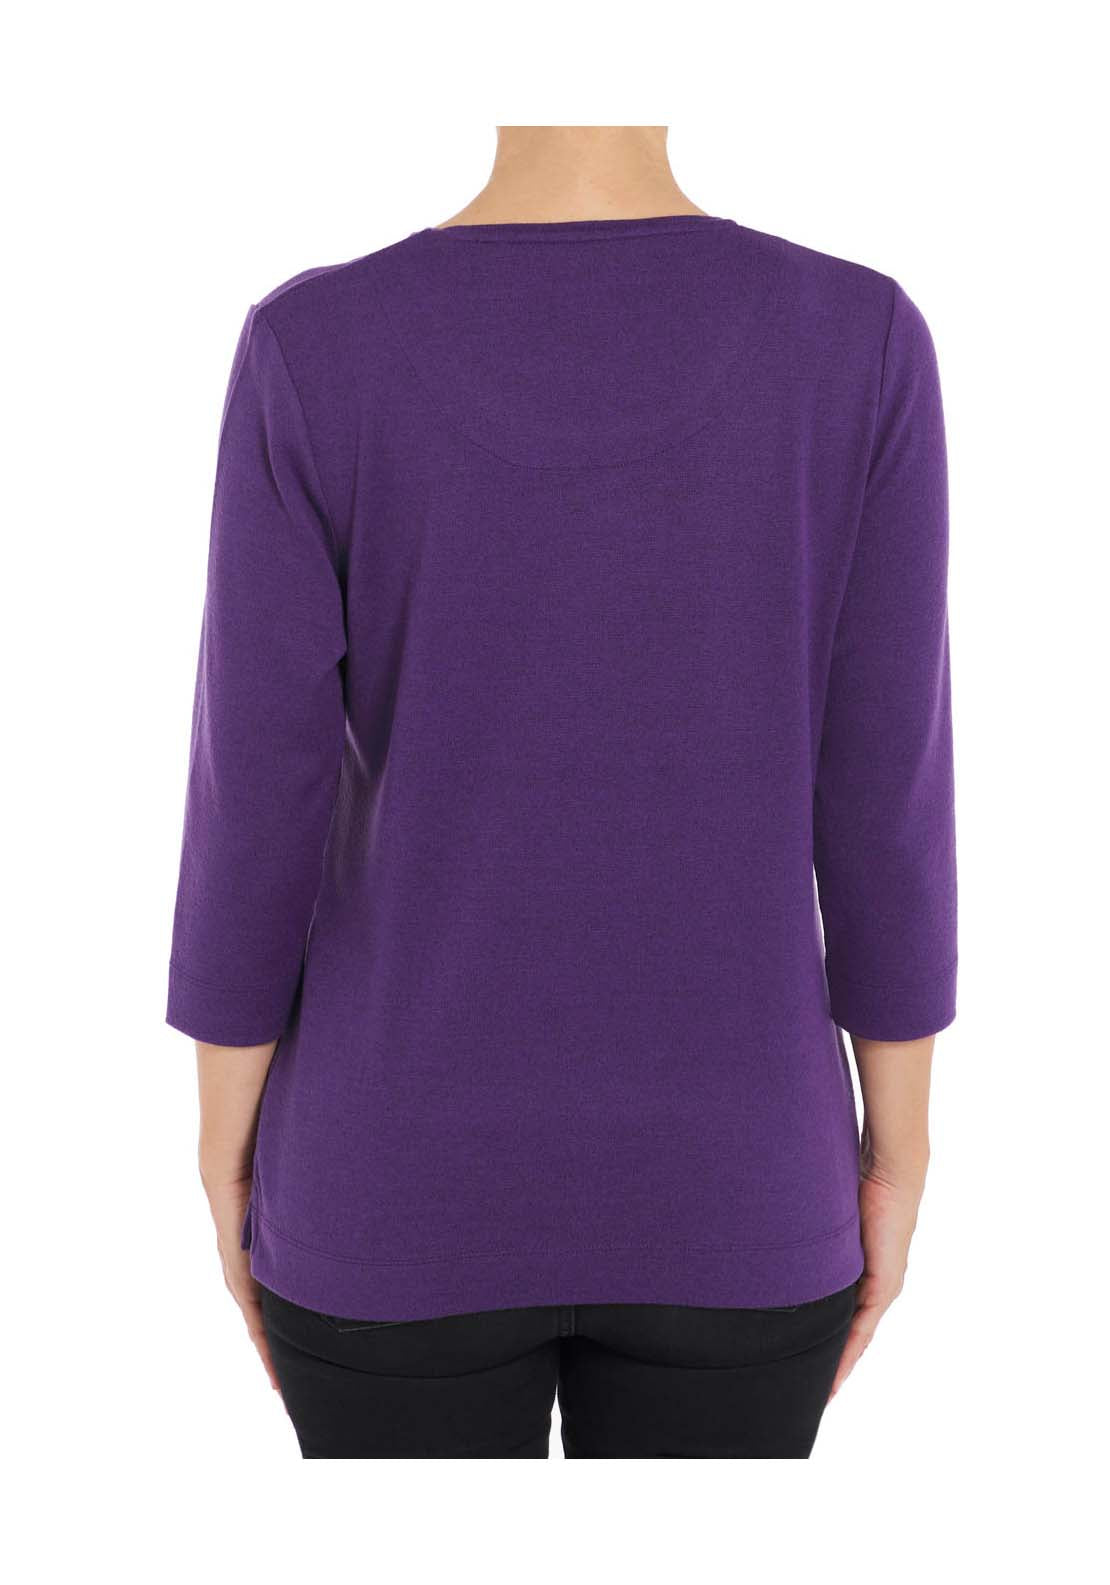 Tigiwear Embellished Lilac Cowl Neck Top 5 Shaws Department Stores